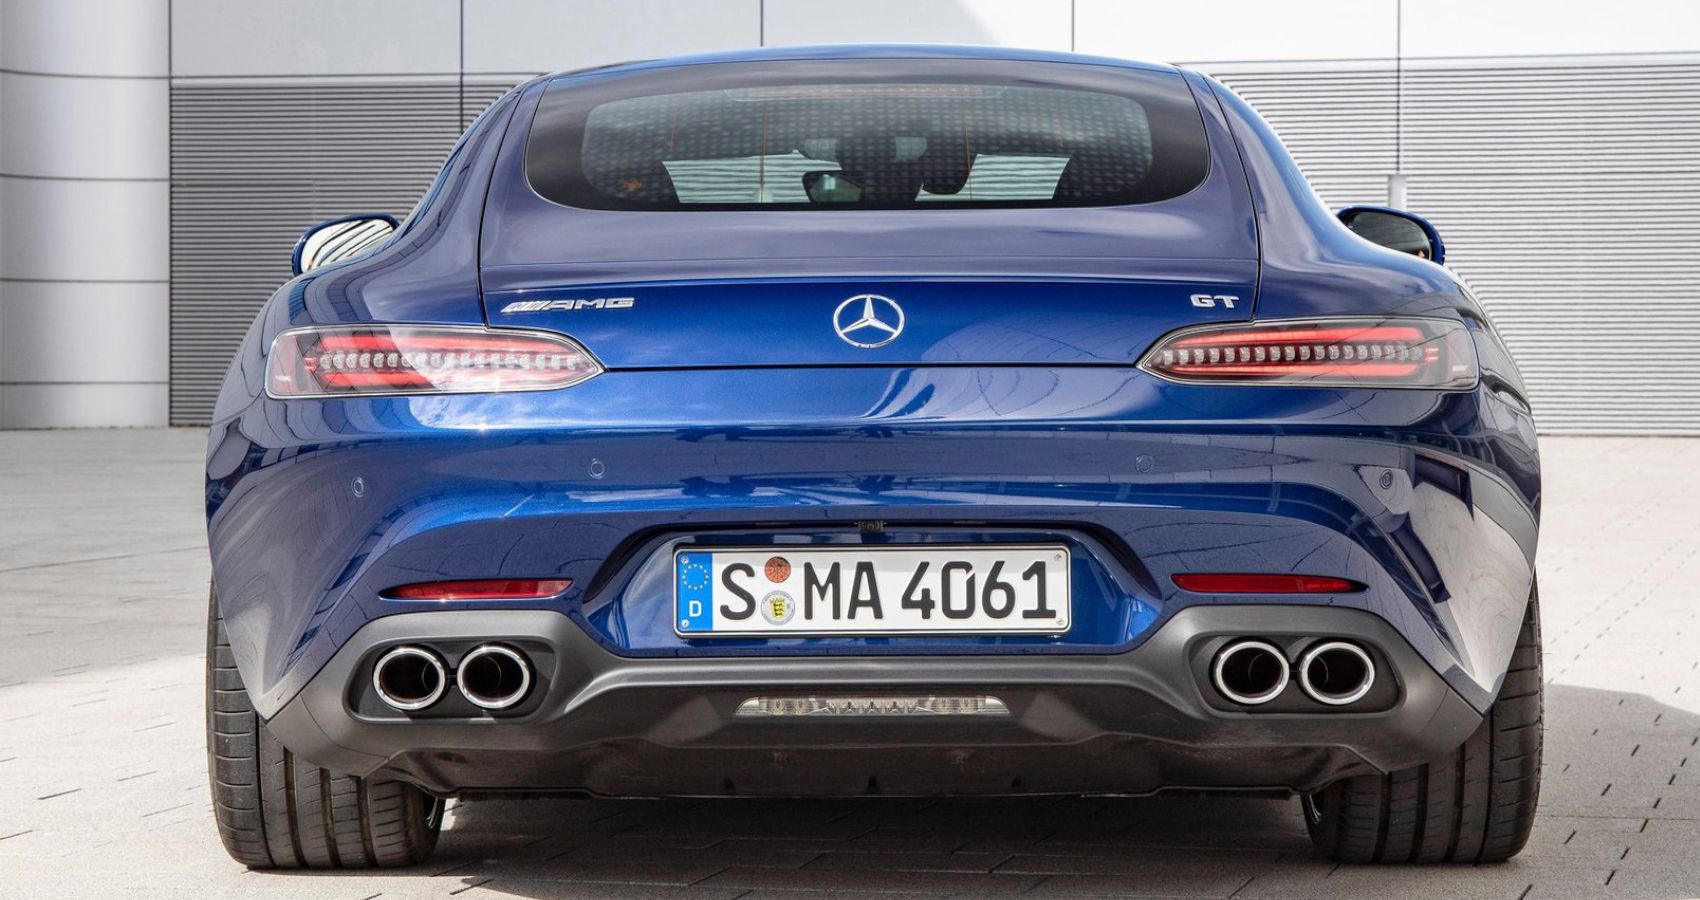 2020 AMG GT In Blue Rear View